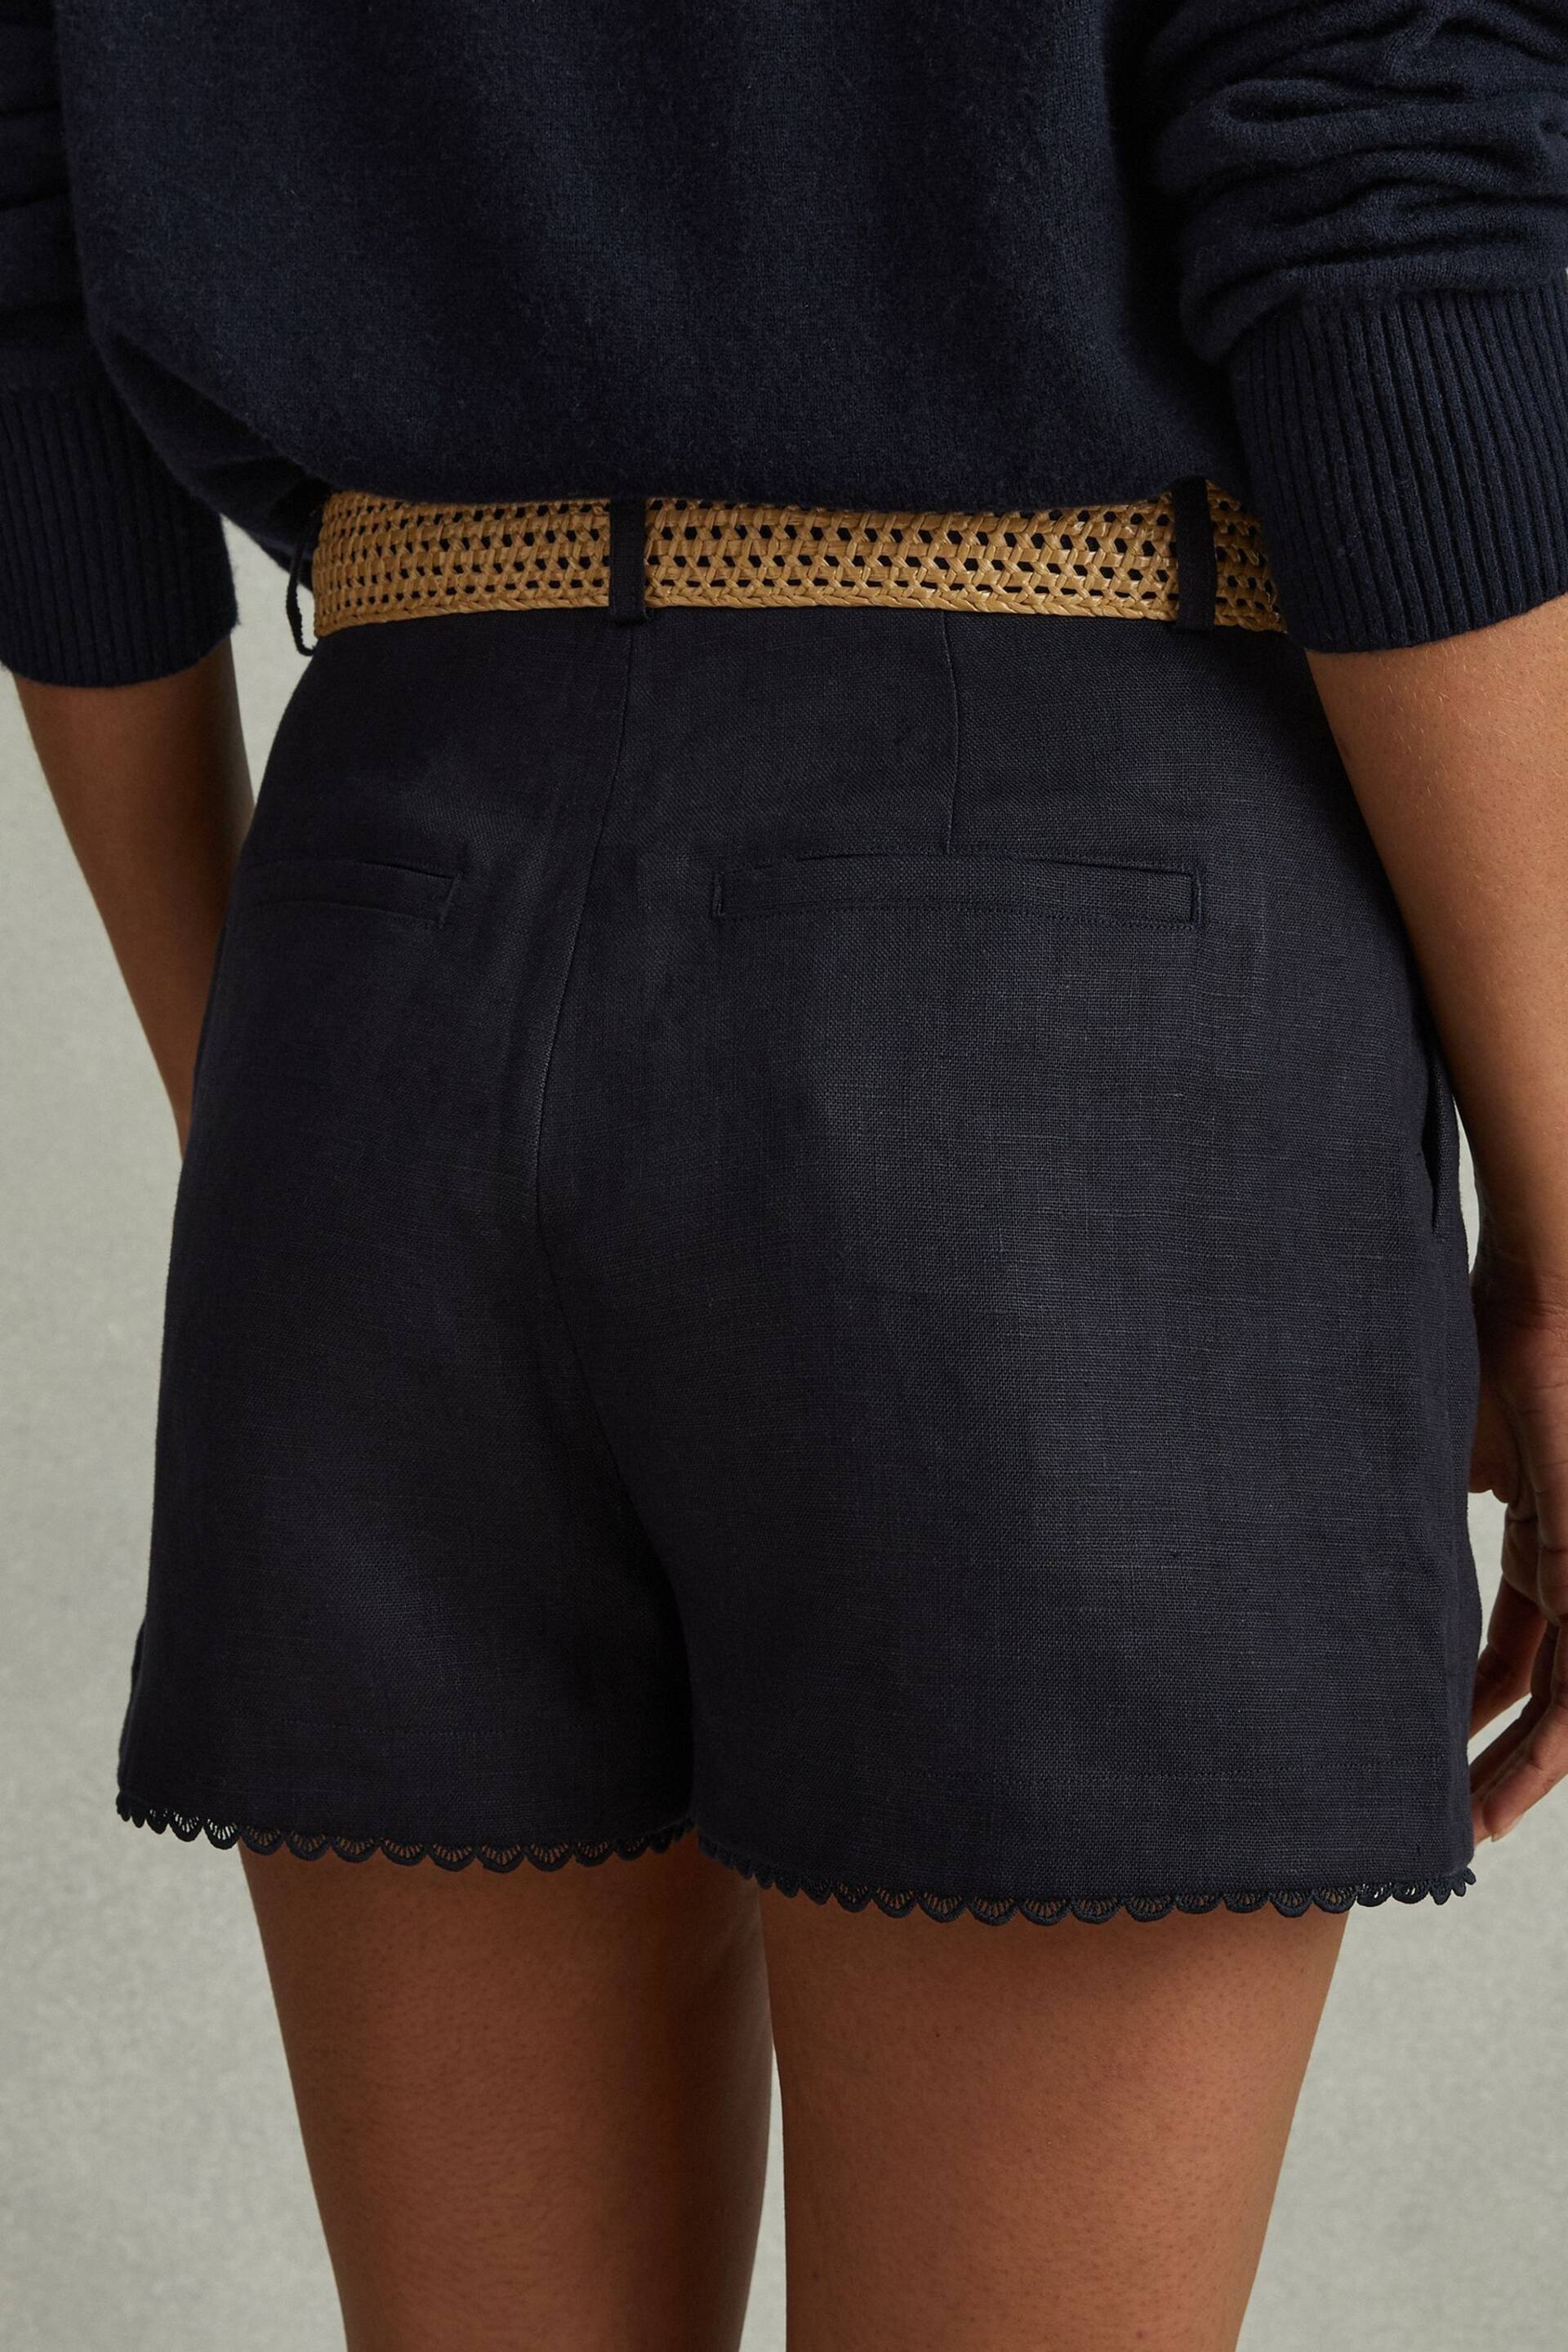 Reiss Navy Belle Linen Belted Shorts - Image 5 of 6